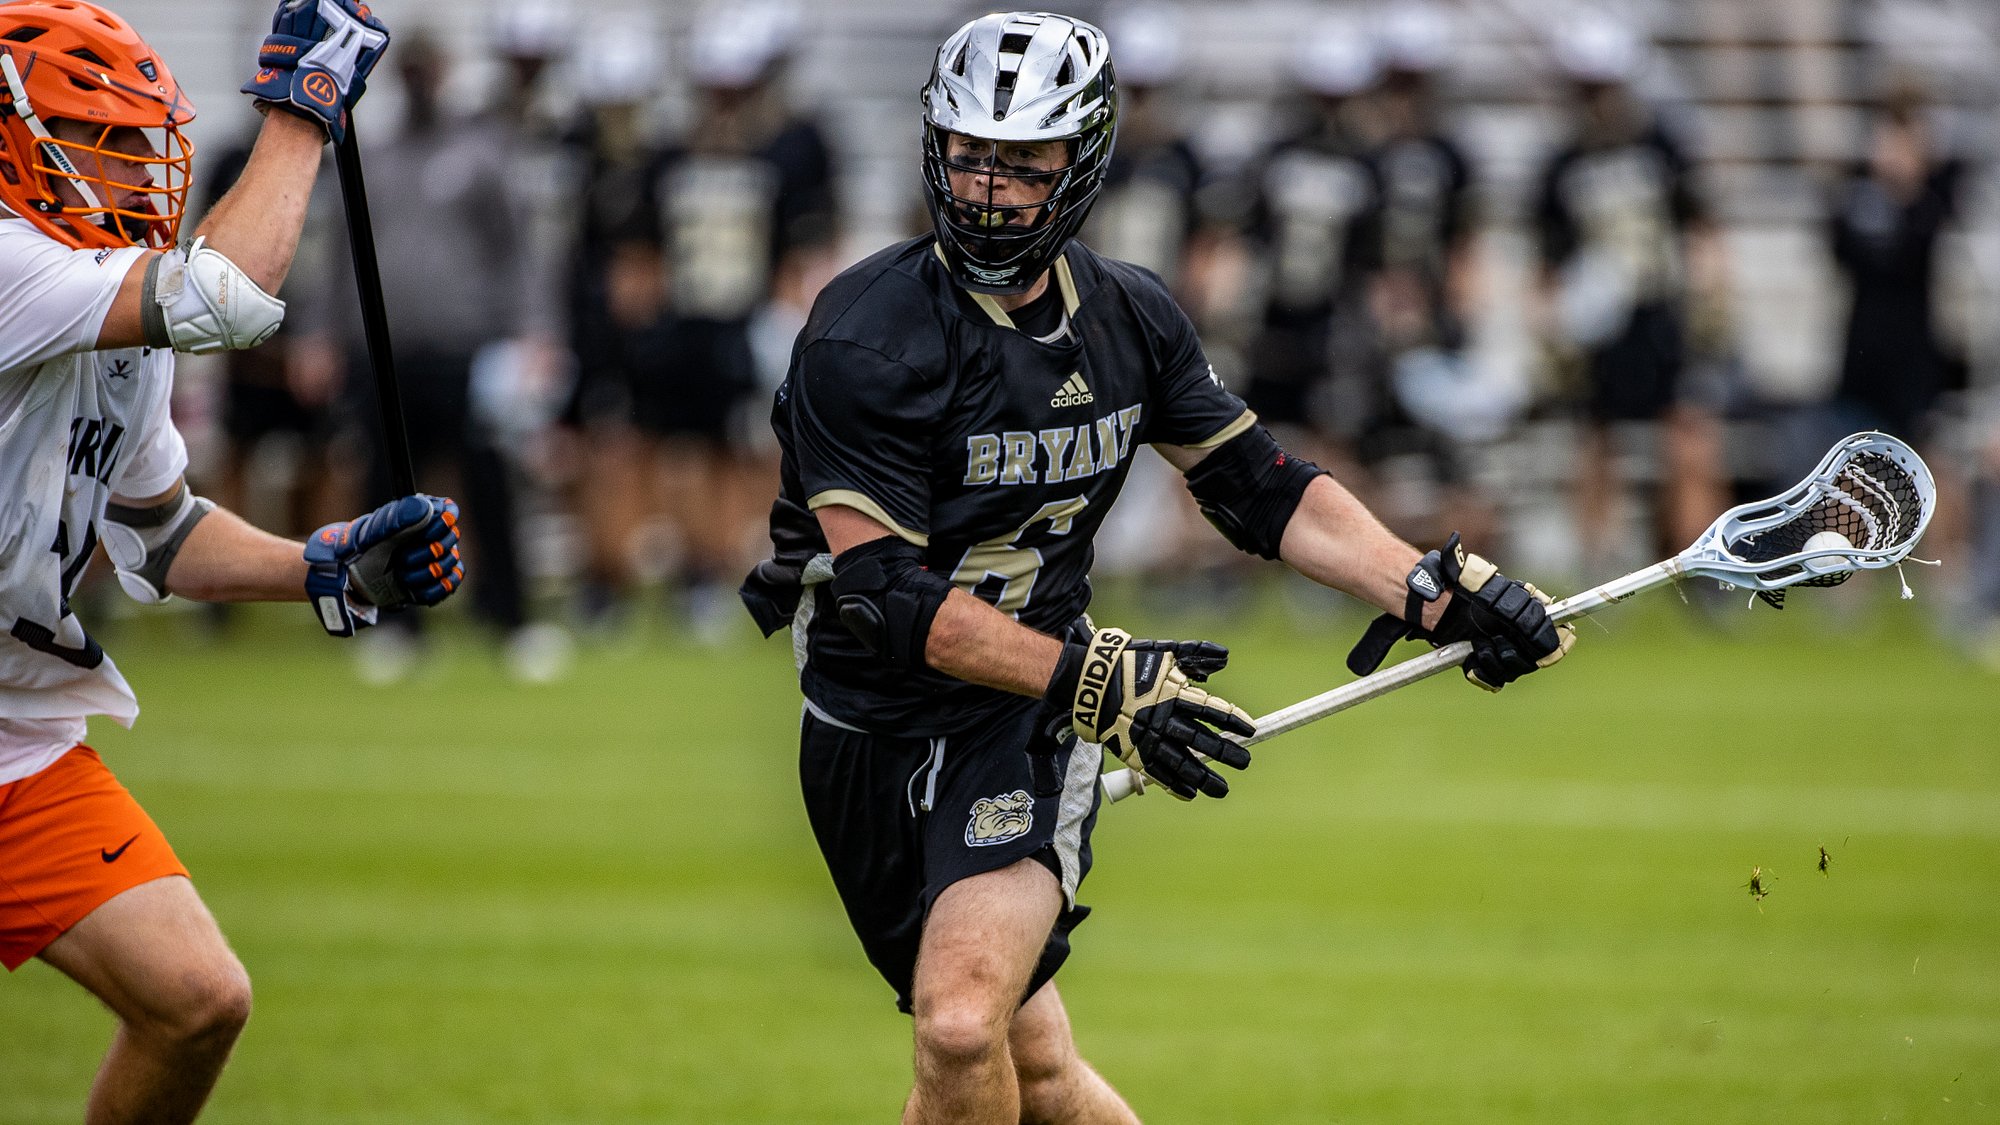 O'Rourke named to USILA Team of the Week